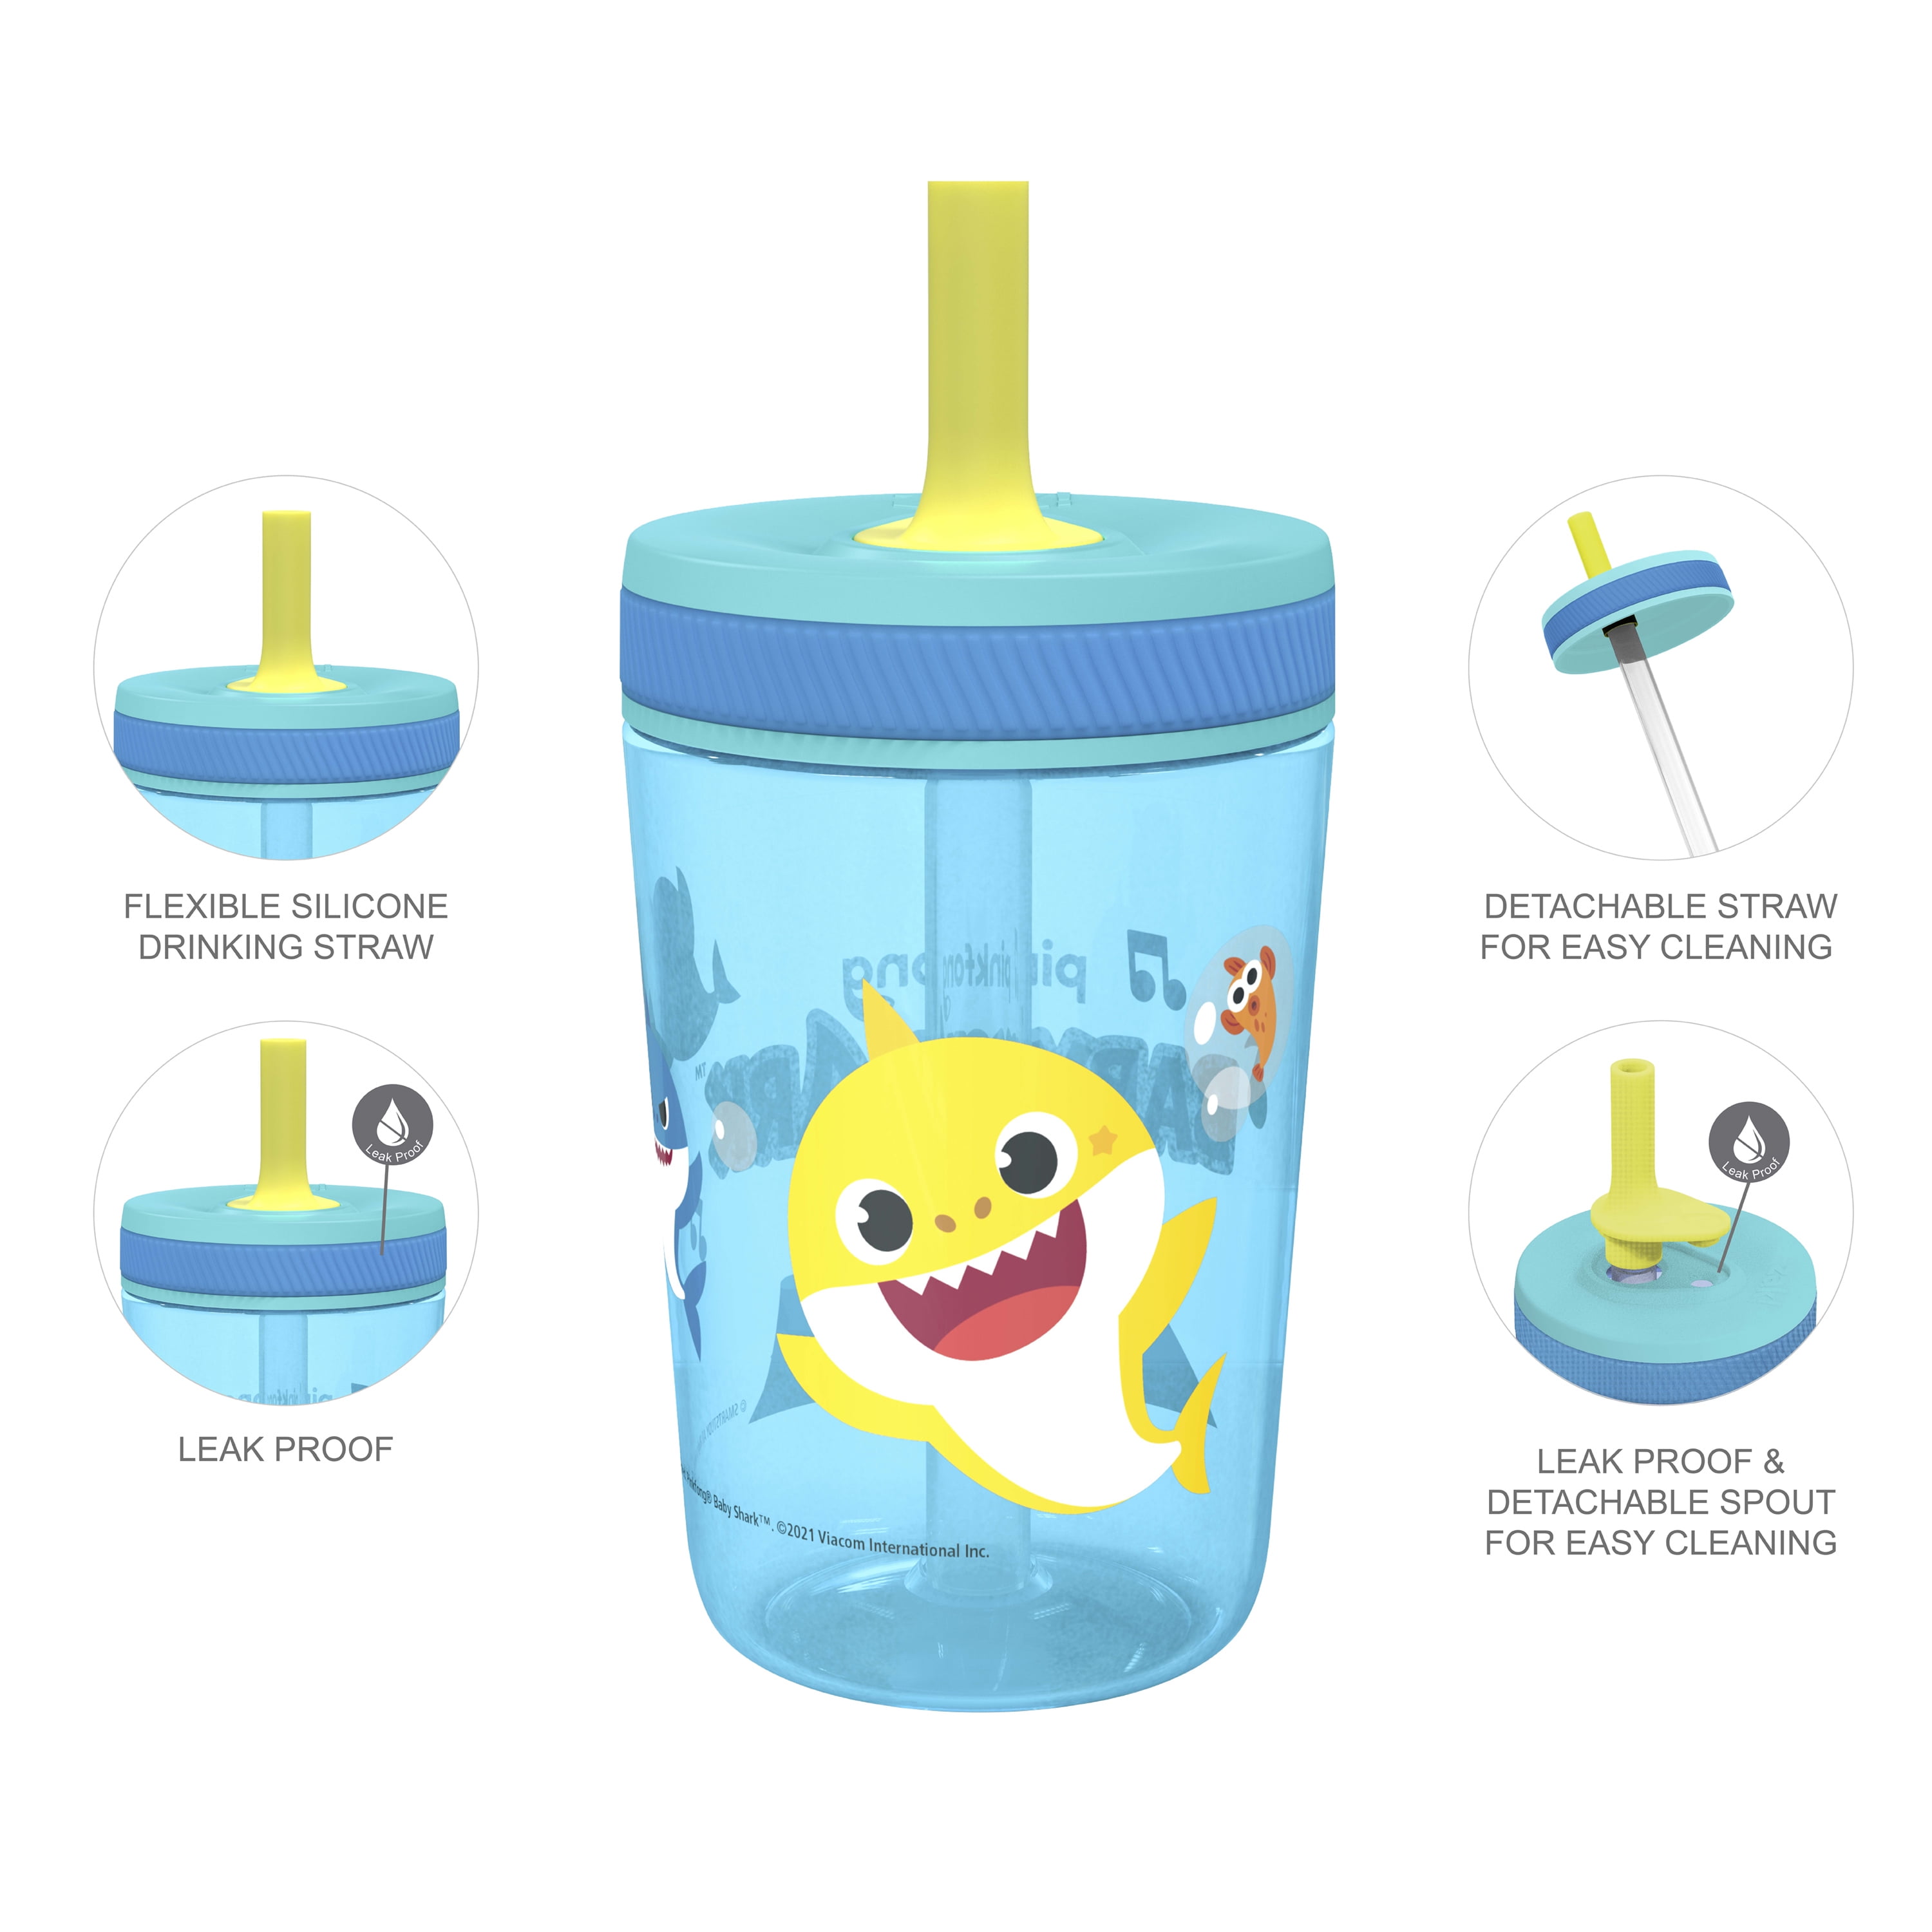 Zak Designs Sonic the Hedgehog Kelso Toddler Cups For Travel or At Home,  12oz Vacuum Insulated Stain…See more Zak Designs Sonic the Hedgehog Kelso